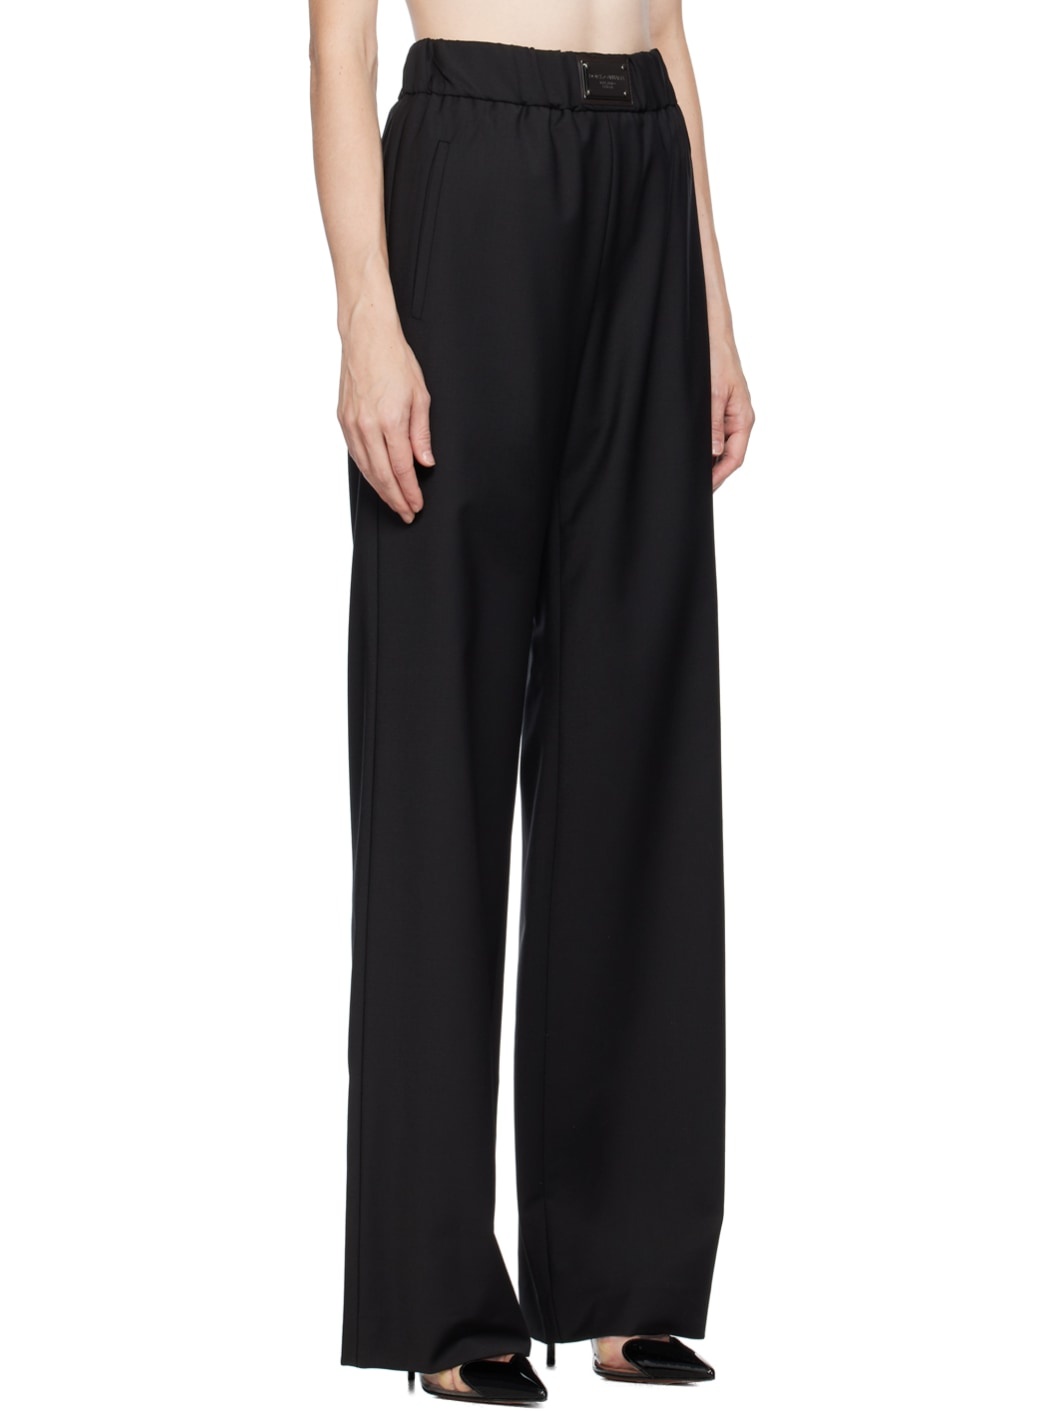 Black Gathered Trousers - 2